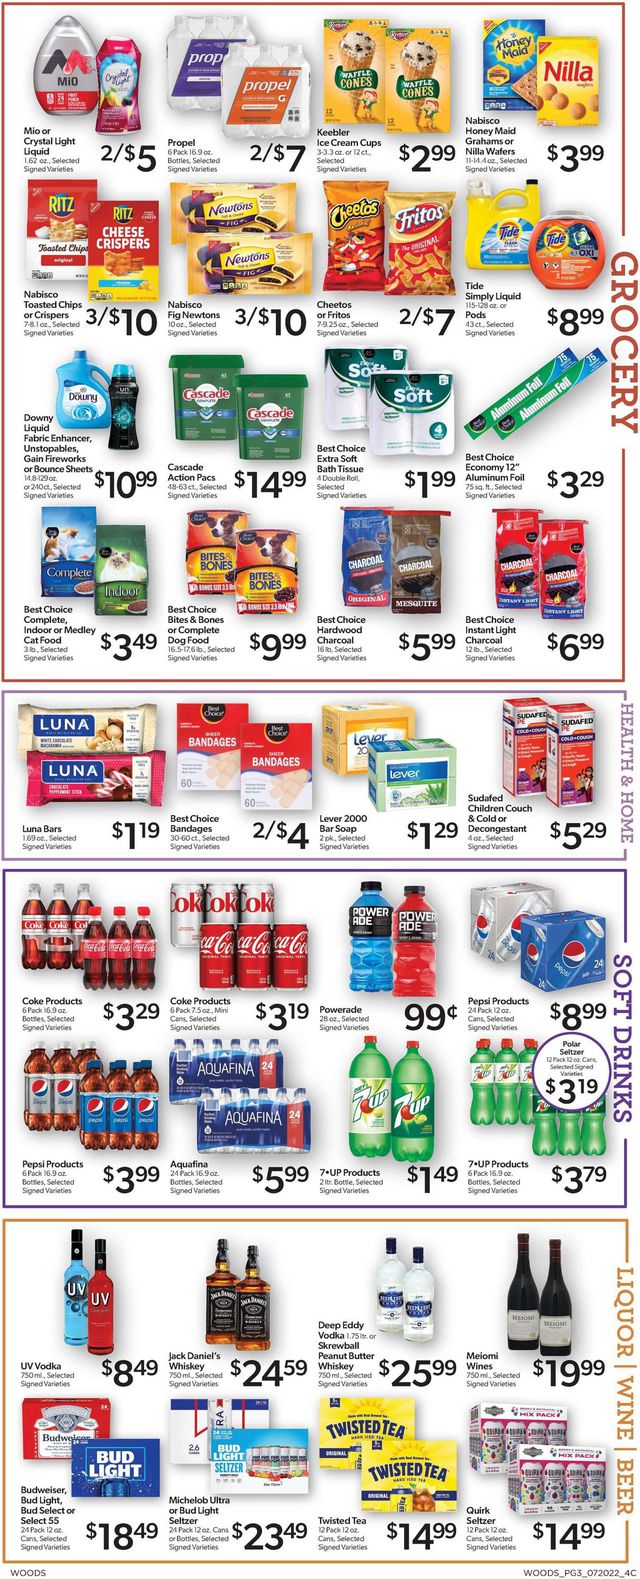 Woods Supermarket Ad from 07/20/2022